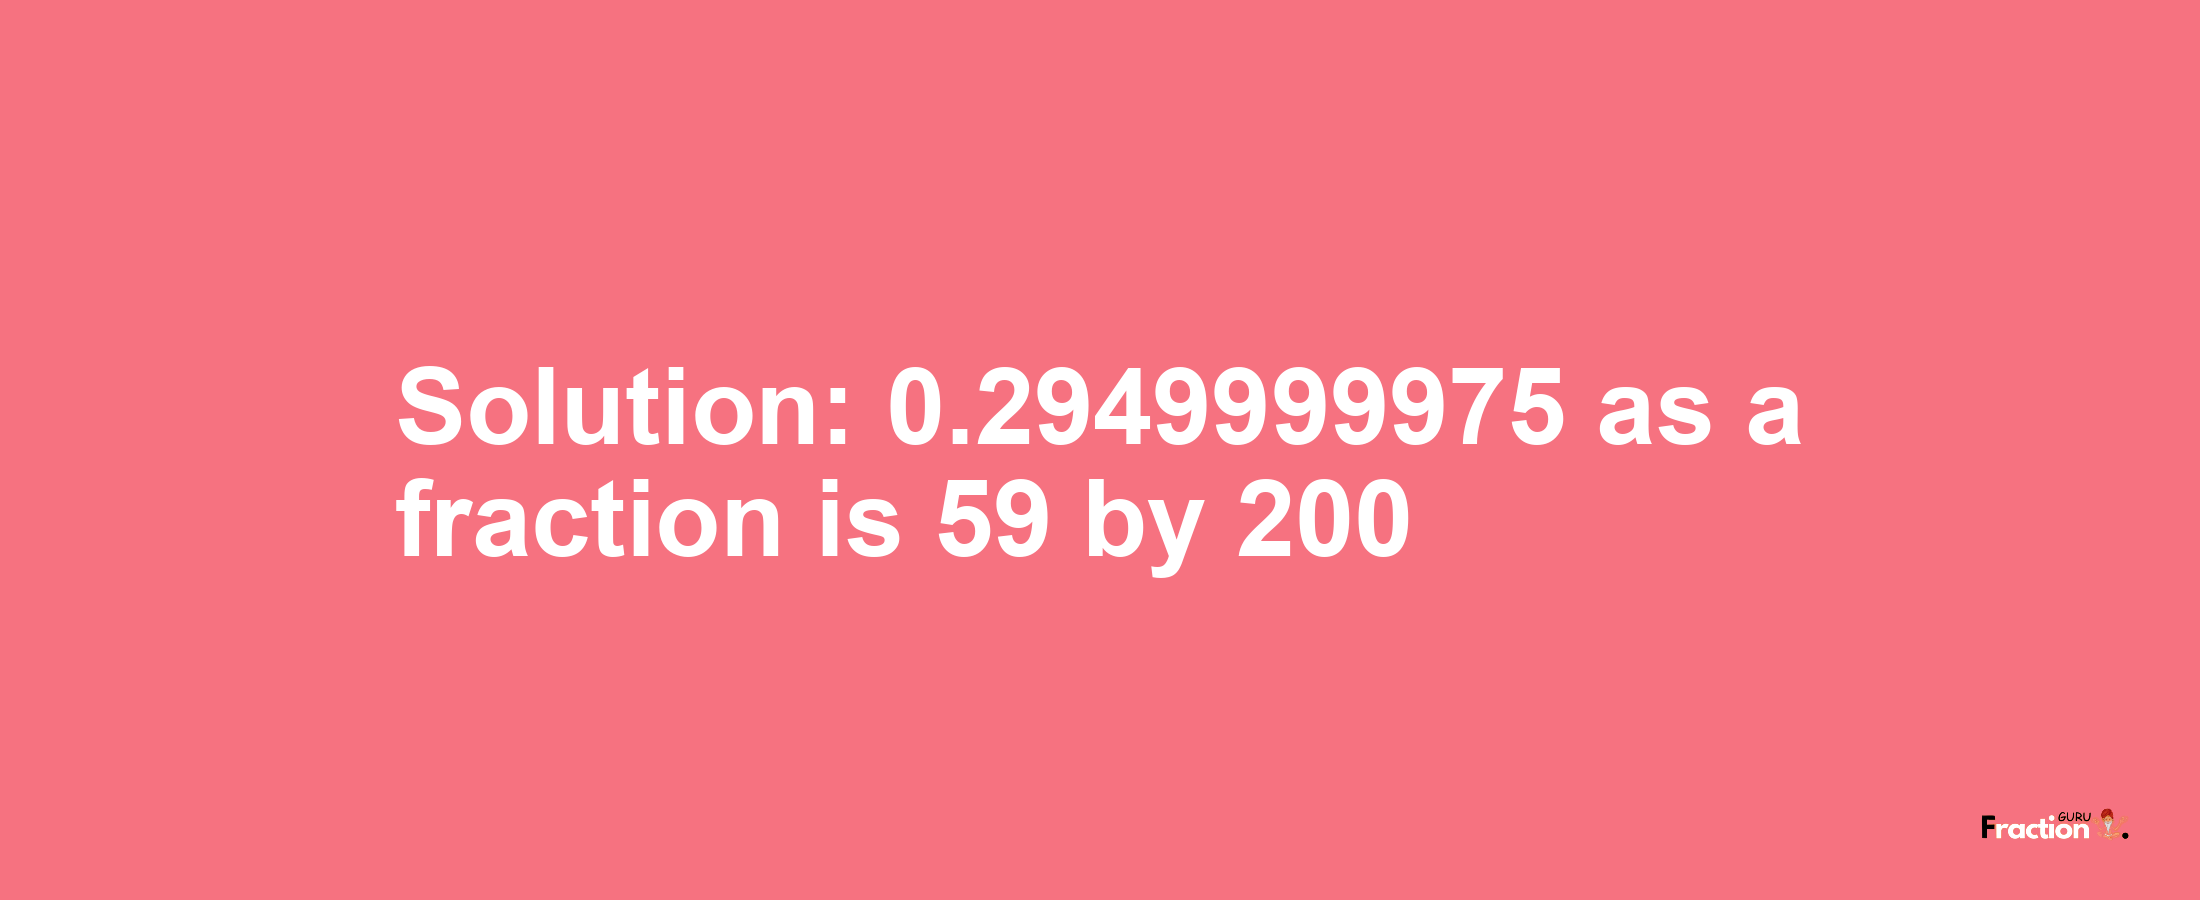 Solution:0.2949999975 as a fraction is 59/200